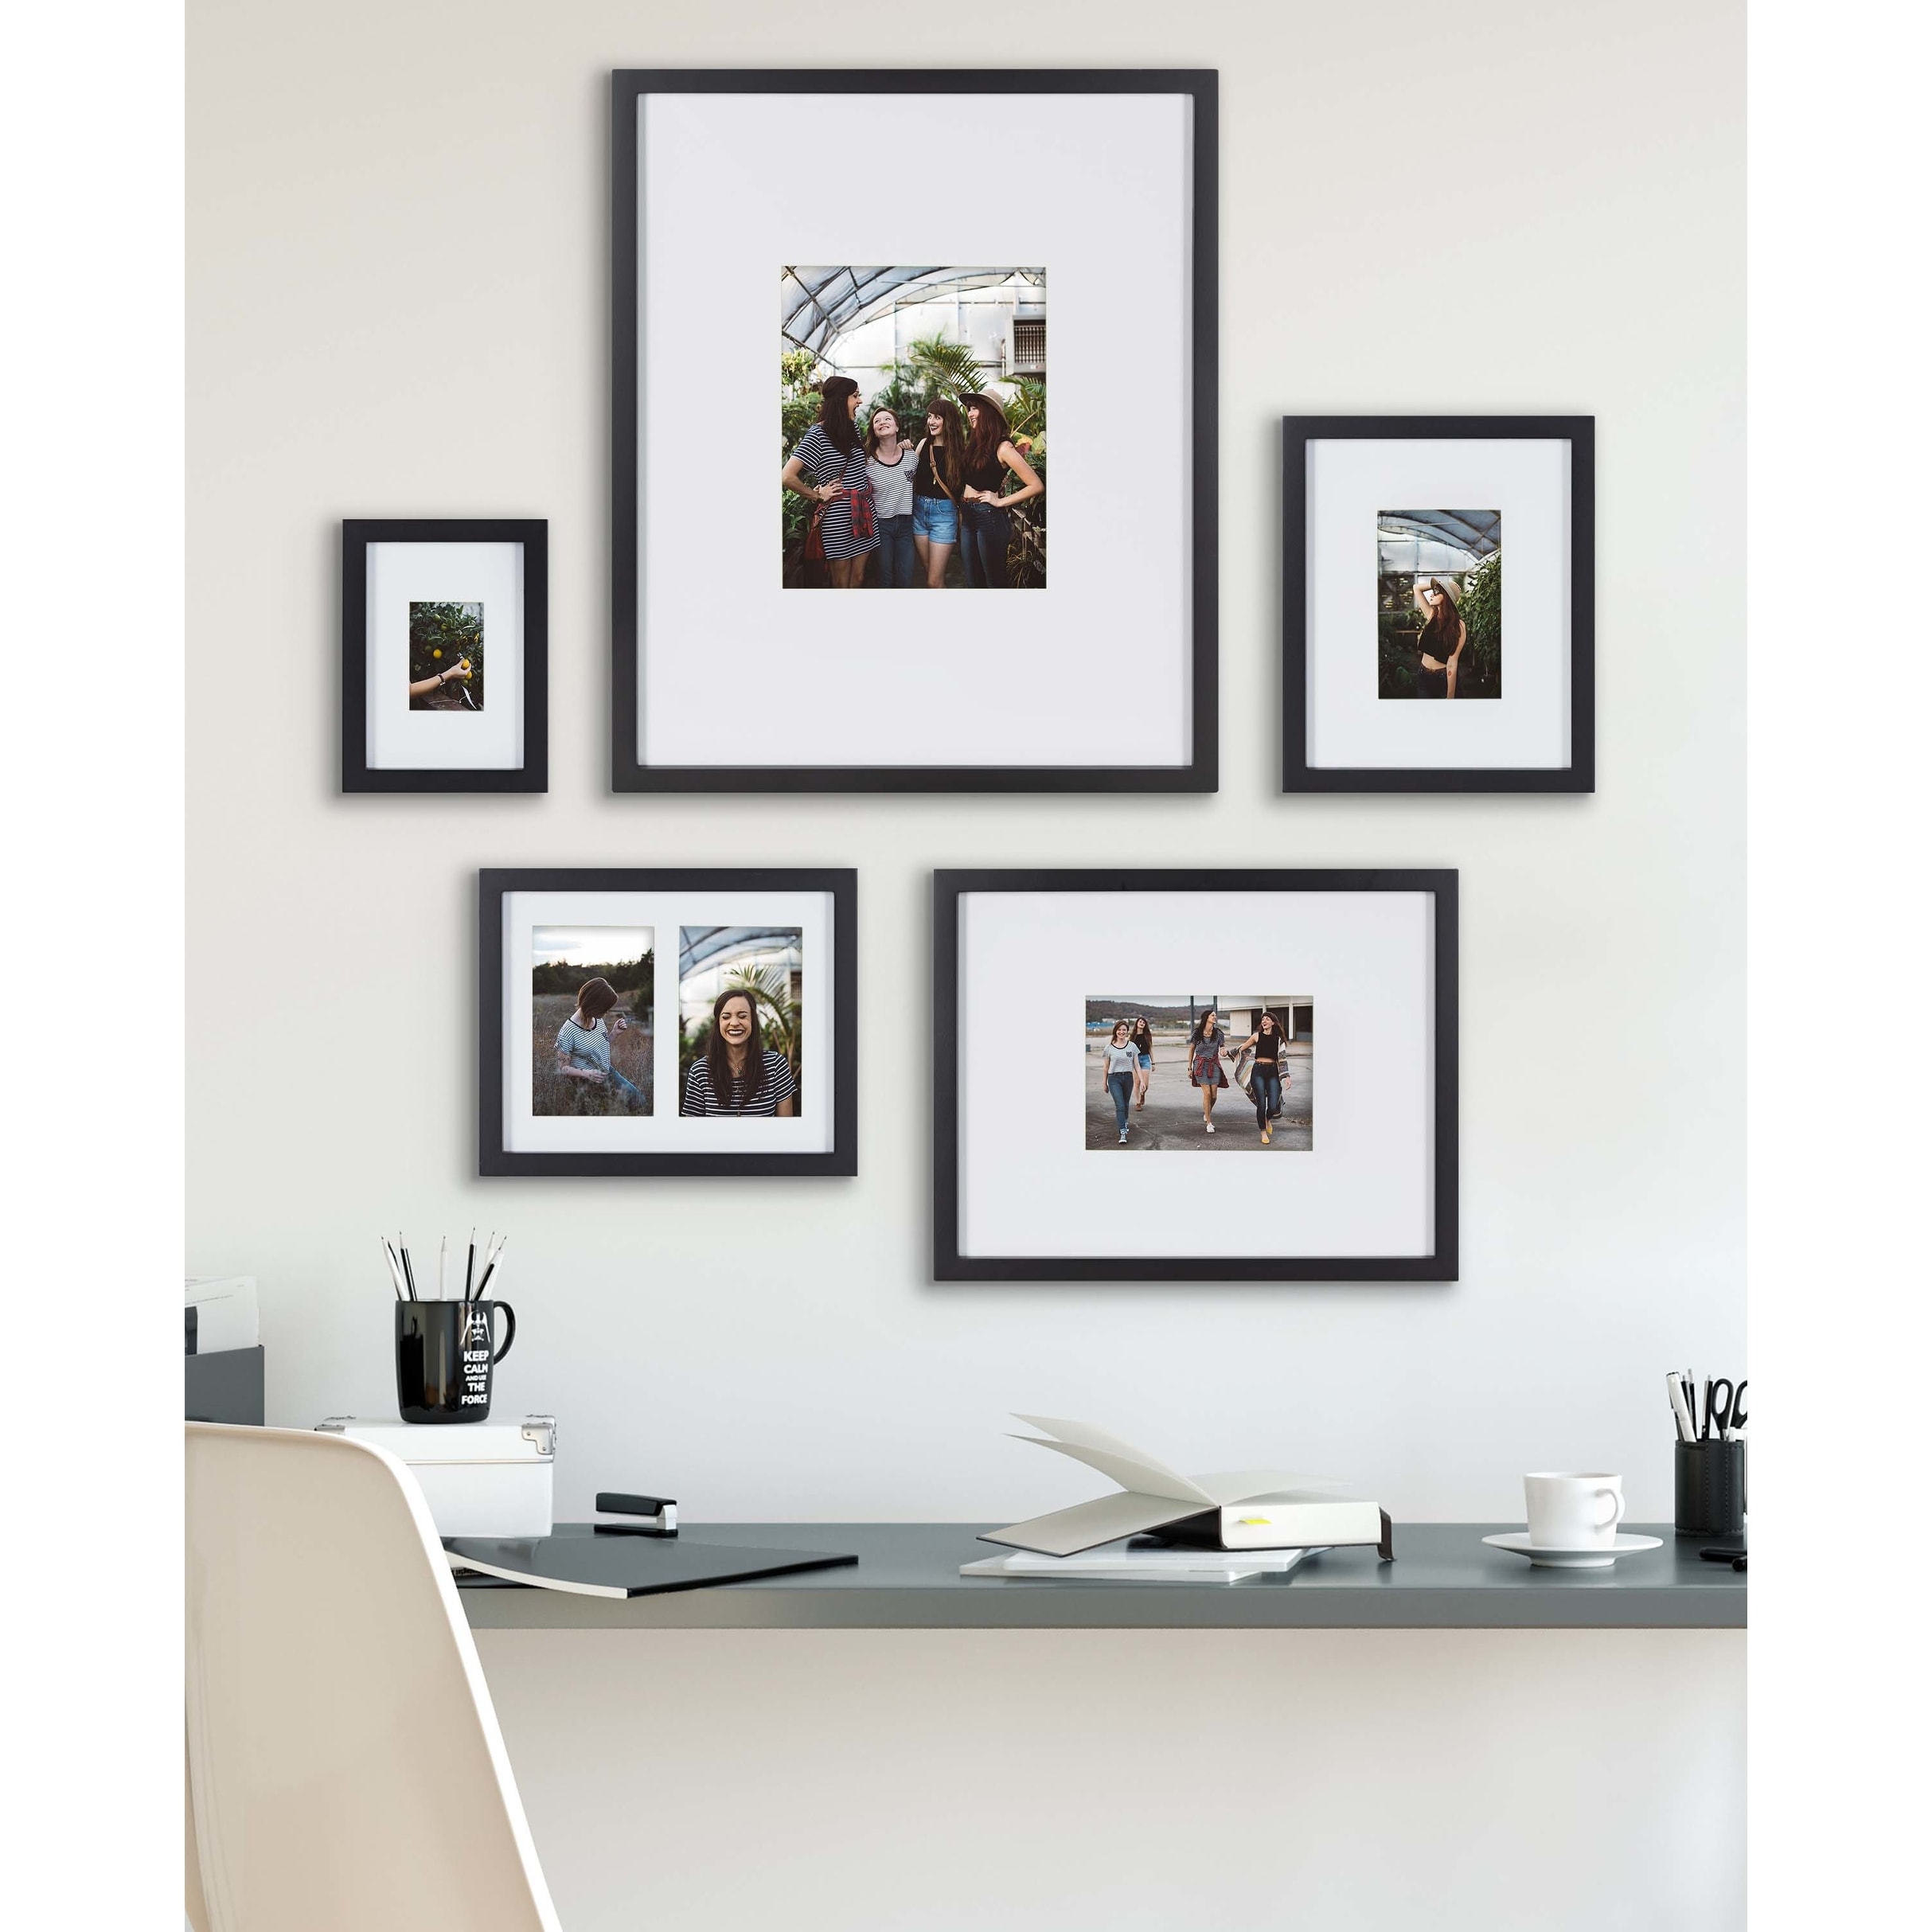 https://ak1.ostkcdn.com/images/products/is/images/direct/136302014bef7fed257ccdcec45dcba8a423e349/Kate-and-Laurel-Gallery-Wall-Matted-Picture-Frame-Set.jpg